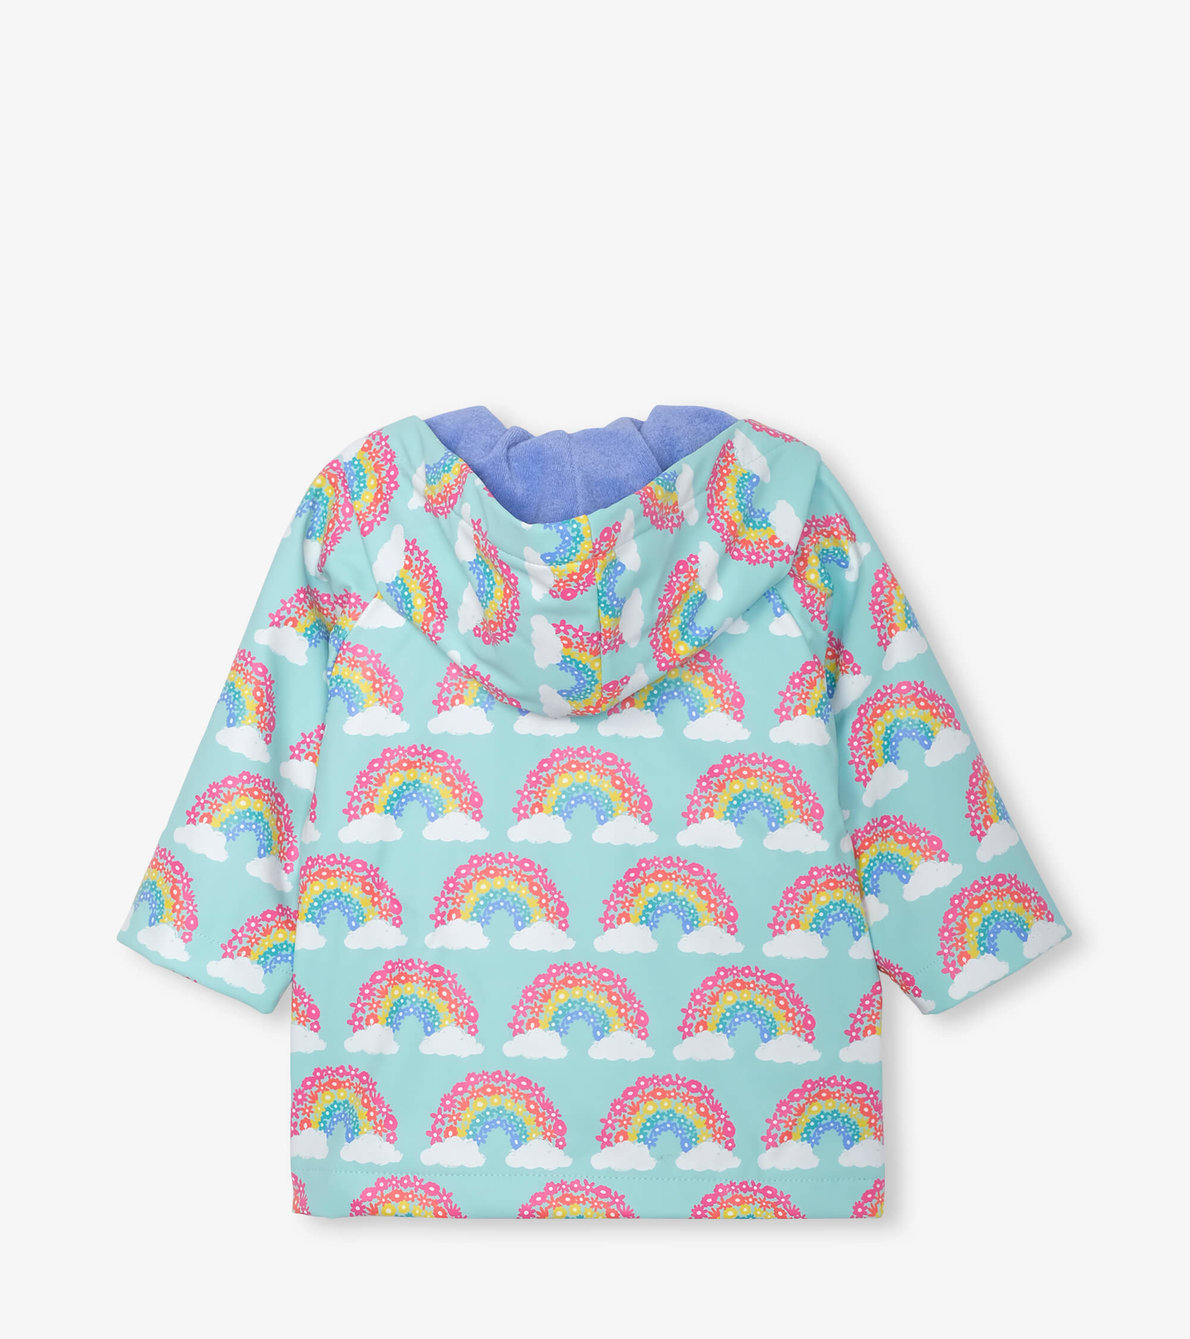 View larger image of Magical Rainbows Baby Raincoat